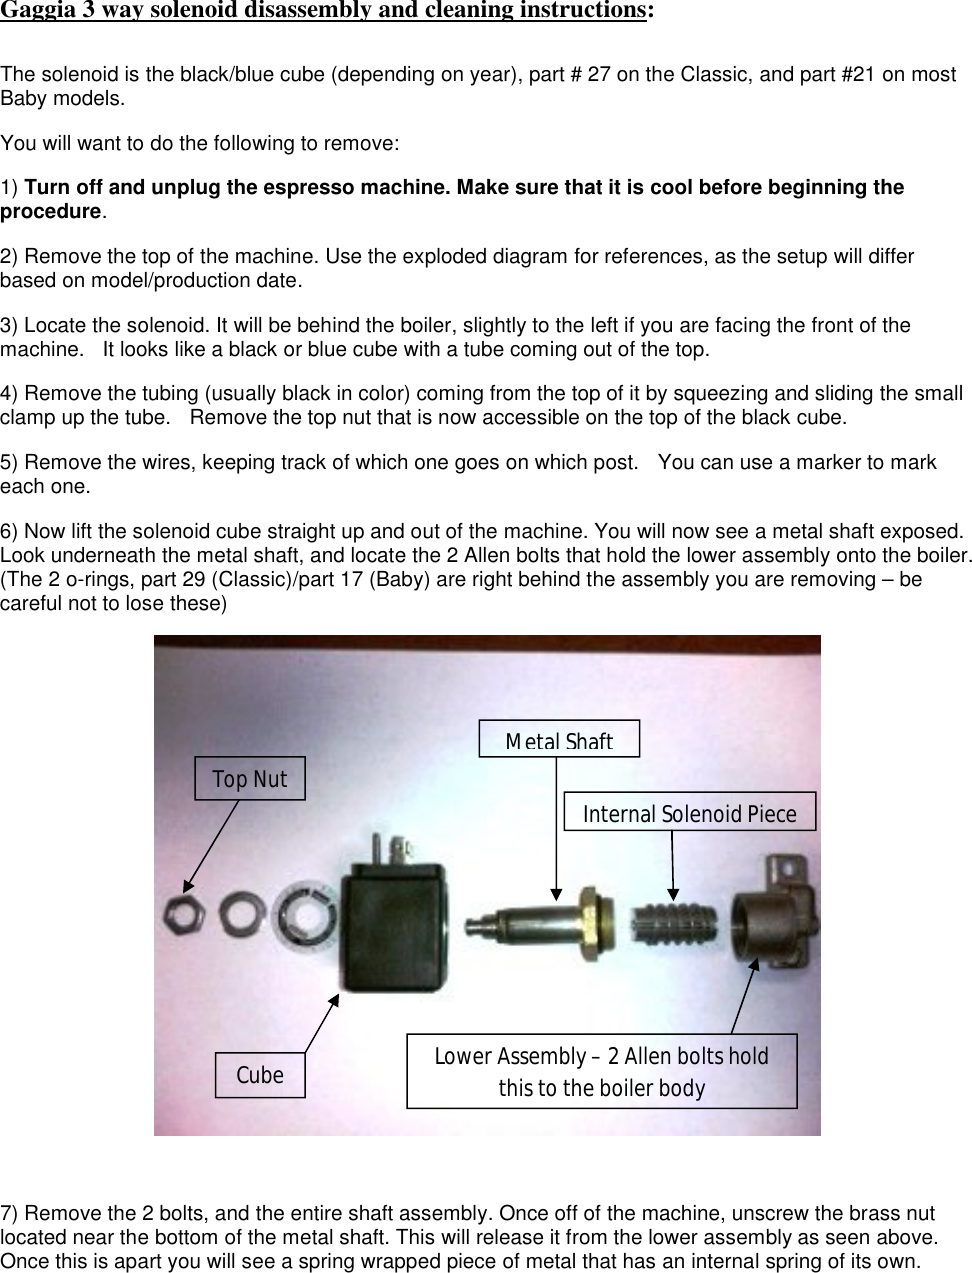 Page 1 of 2 - Classic 3-Way Solenoid Cleaning